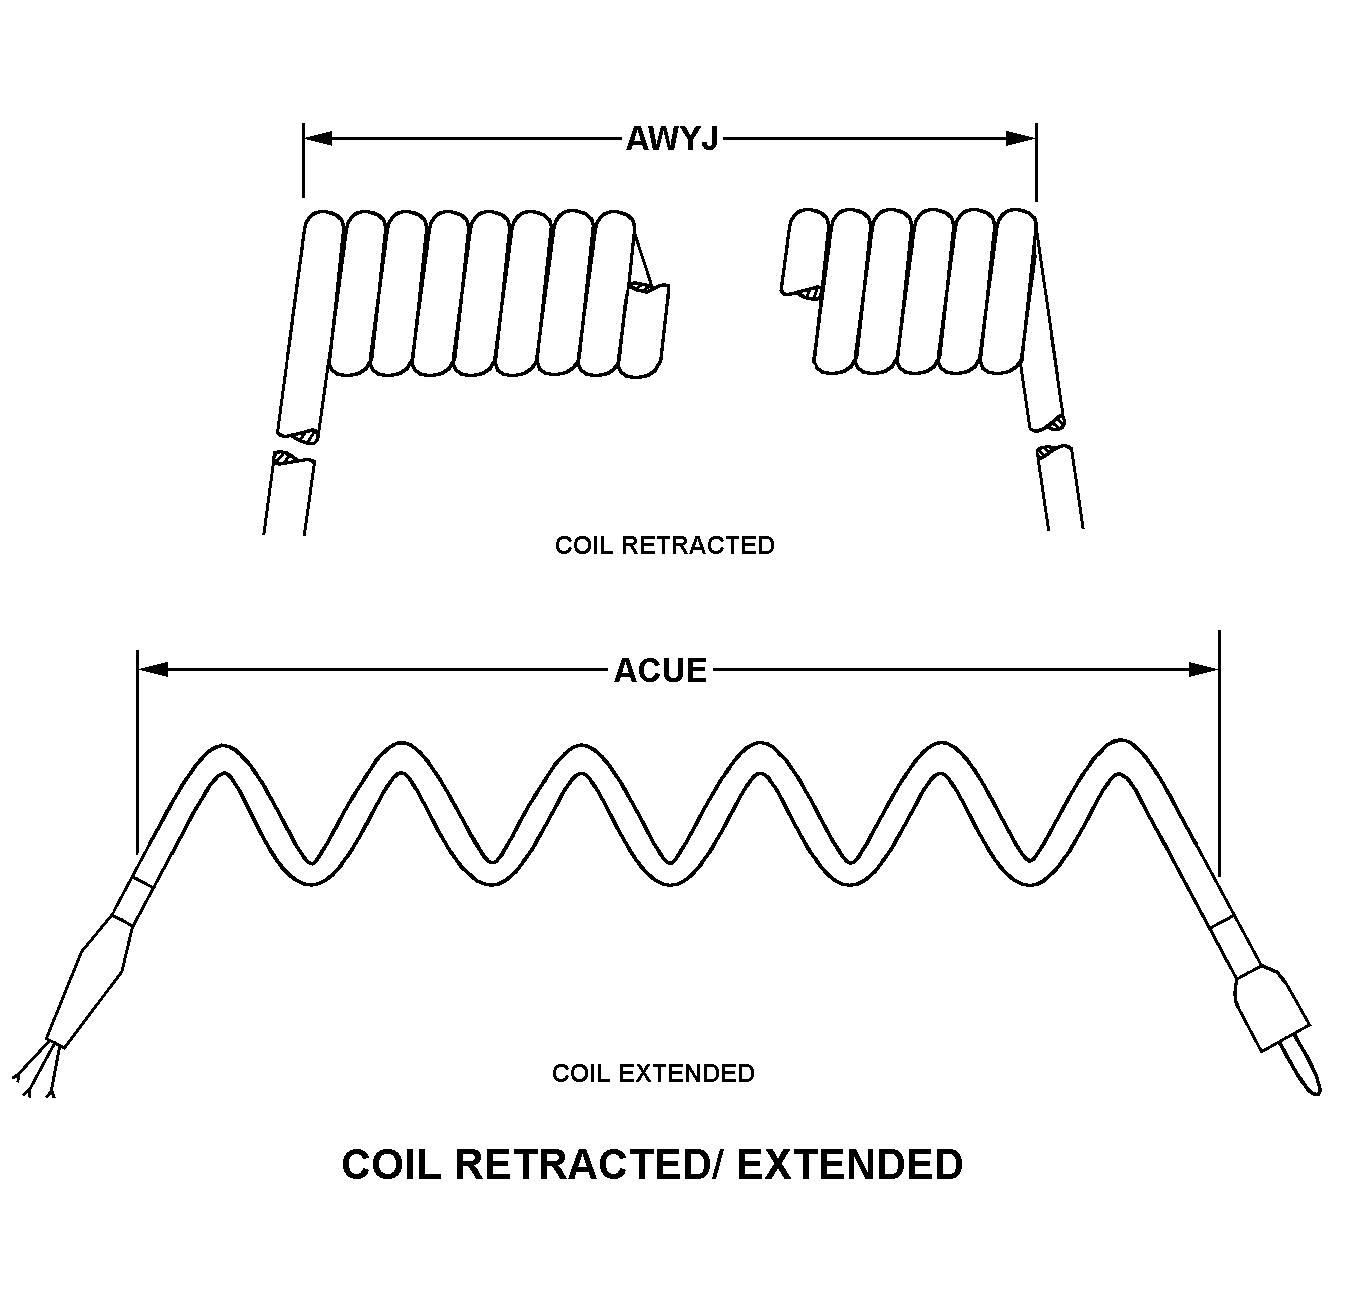 COIL RETRACTED/EXTENDED style nsn 5995-01-336-1787